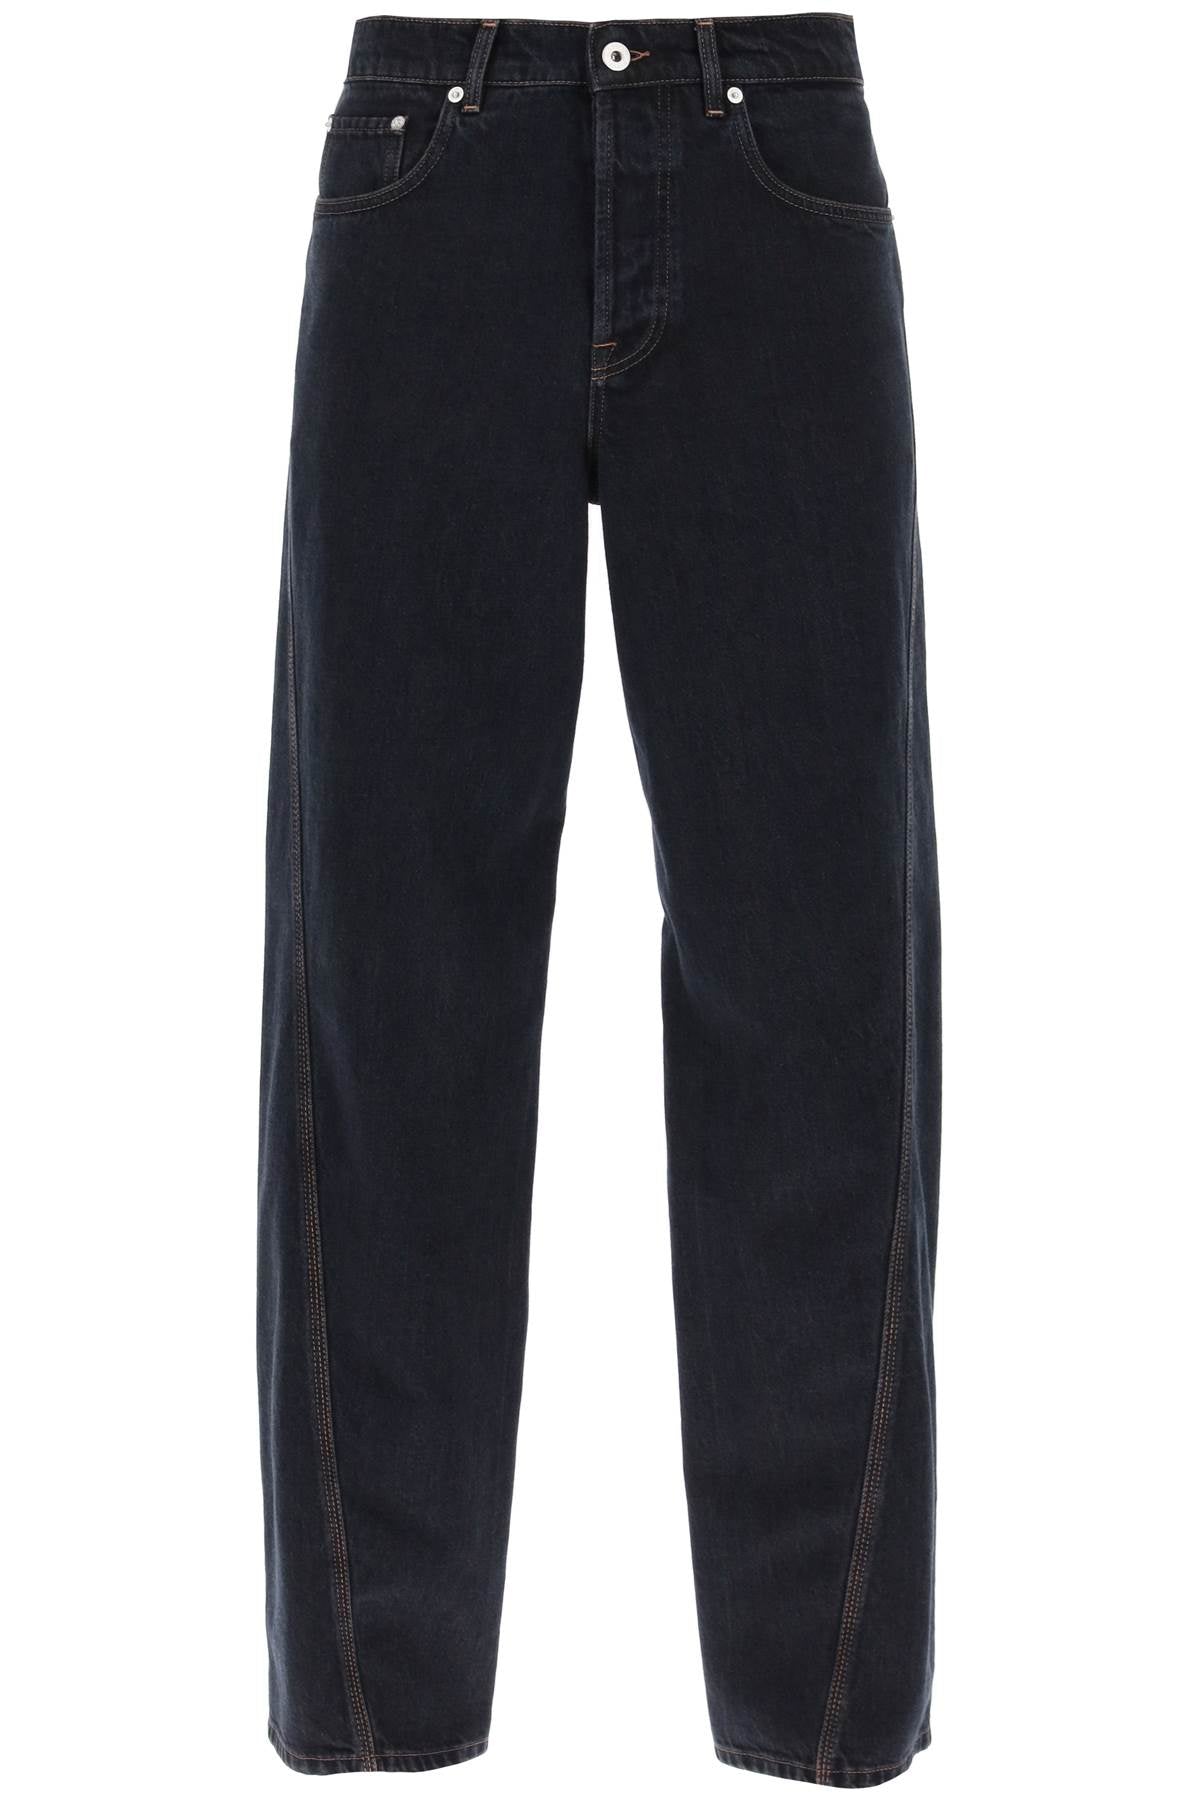 LANVIN Men's Dark Wash Baggy Jeans with Twisted Seams - FW23